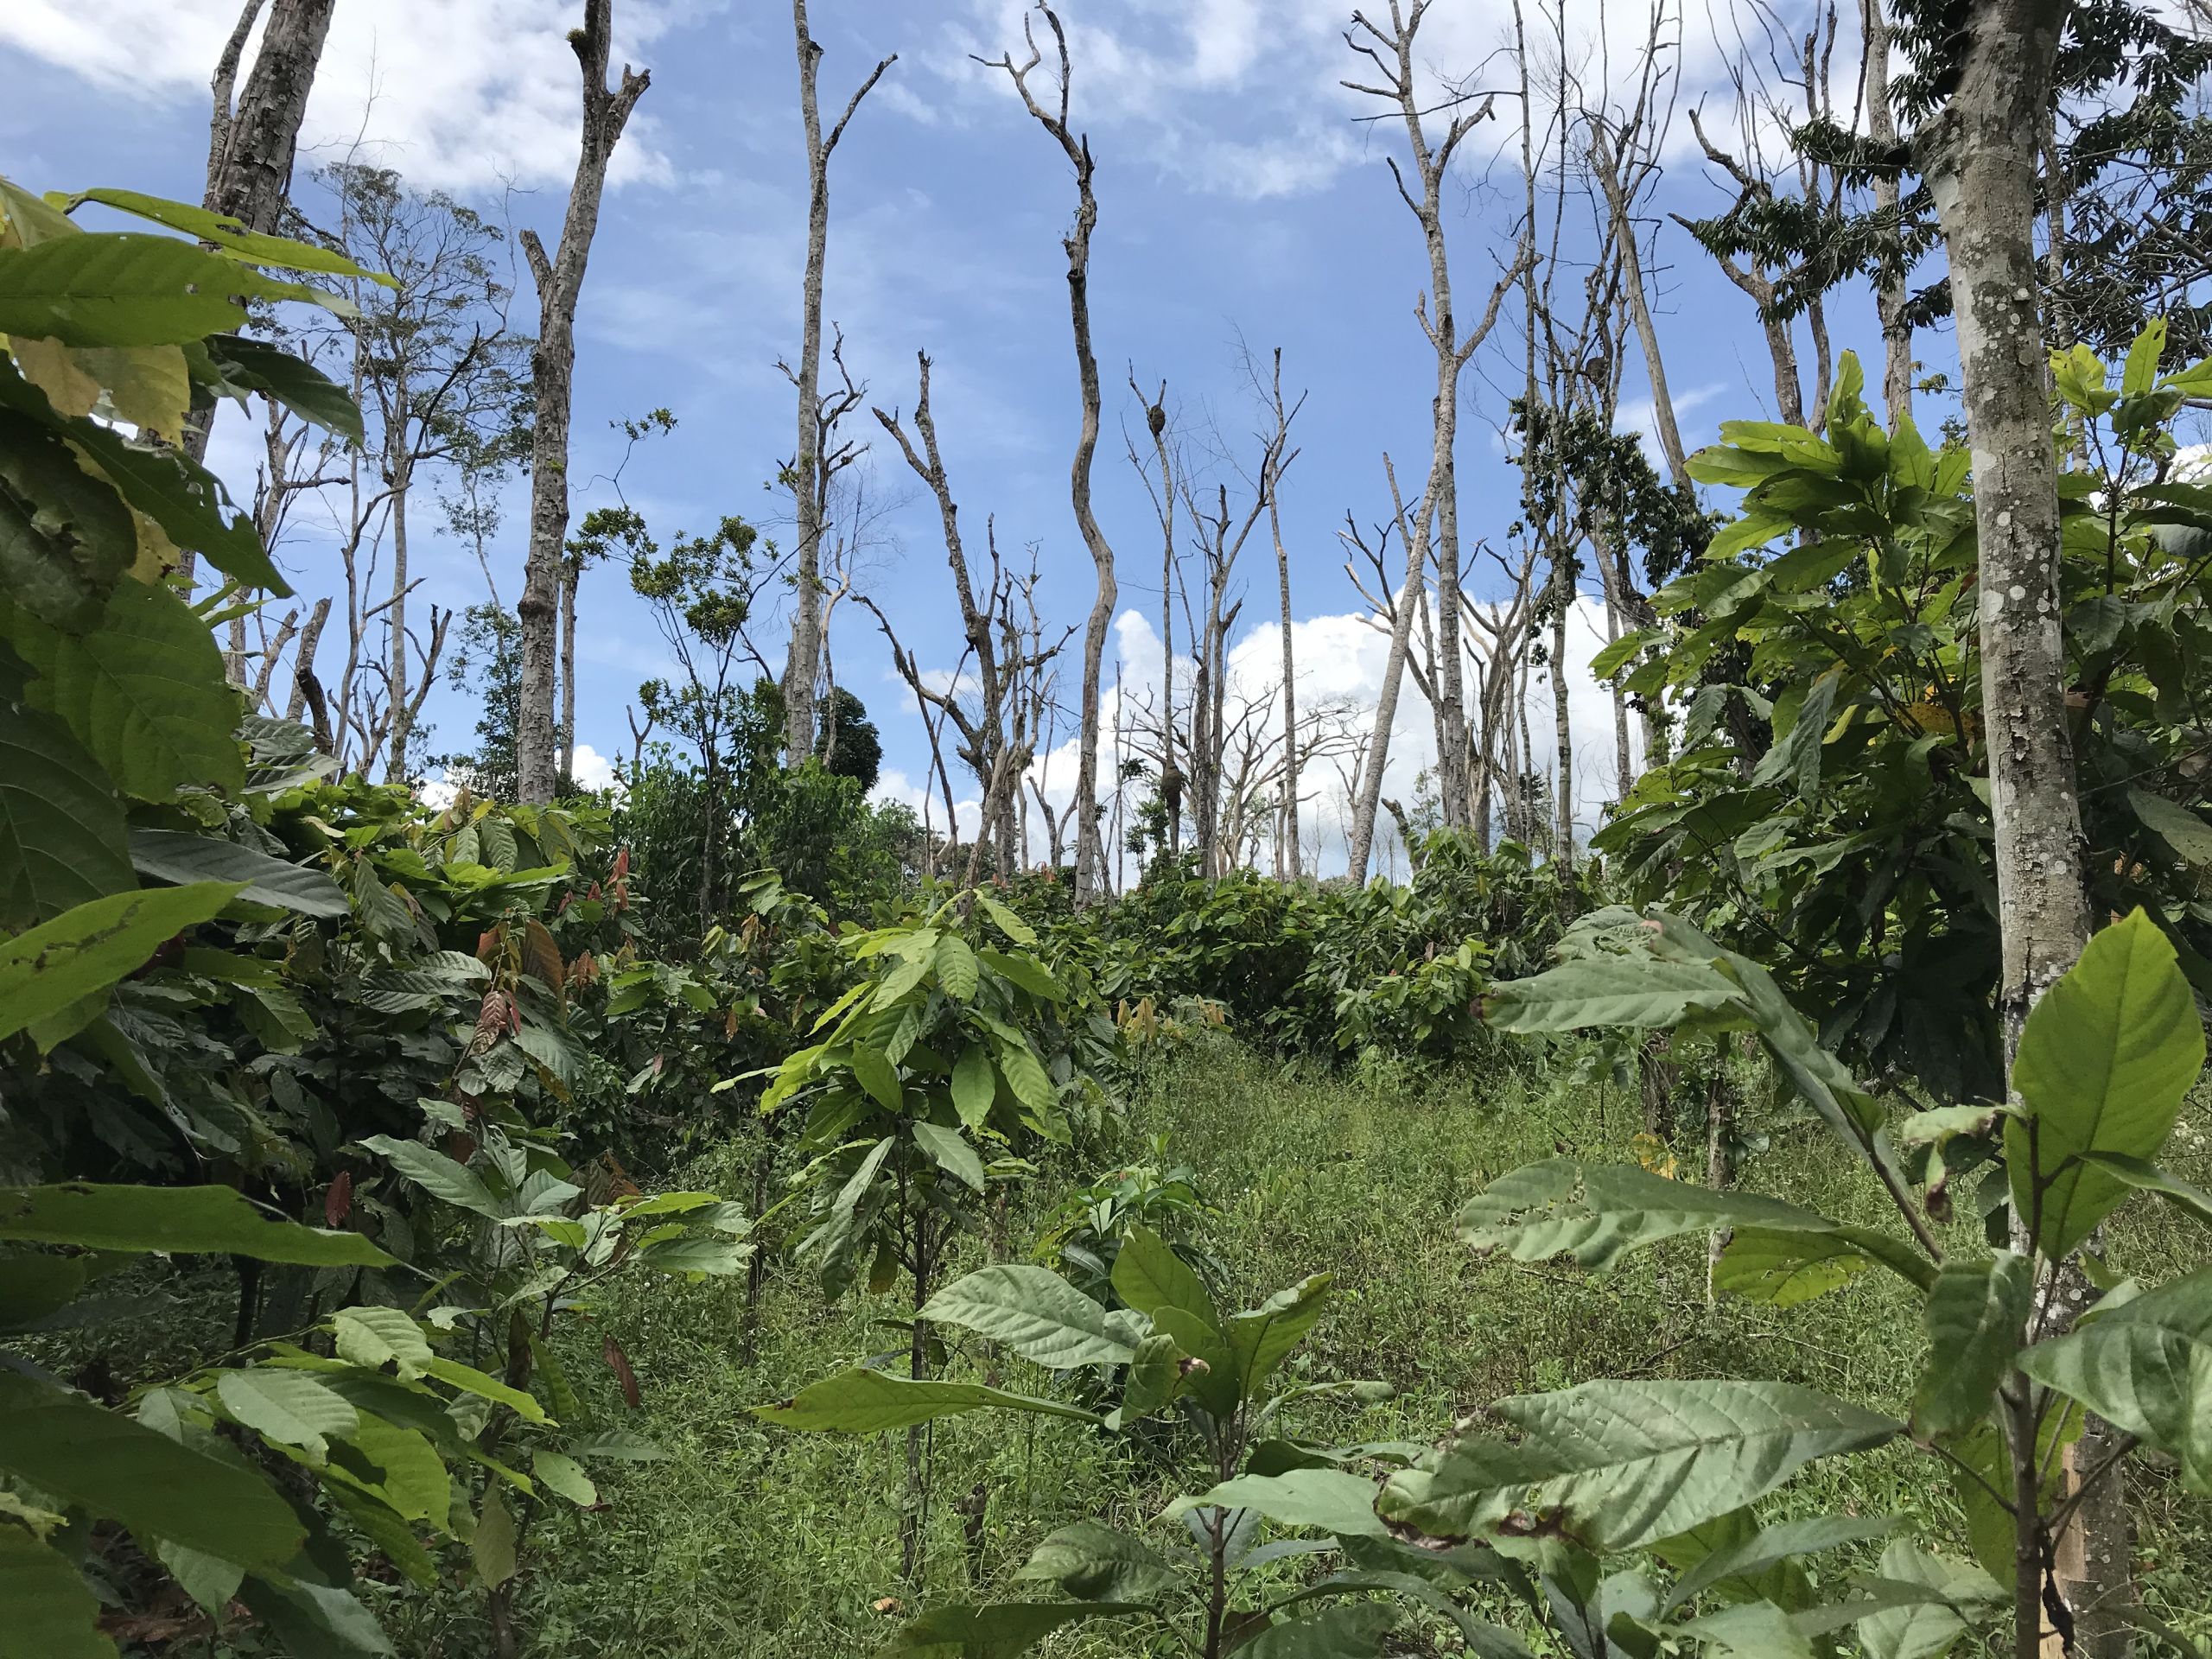 Smallholder vanilla agroforests in Madagascar with support trees for